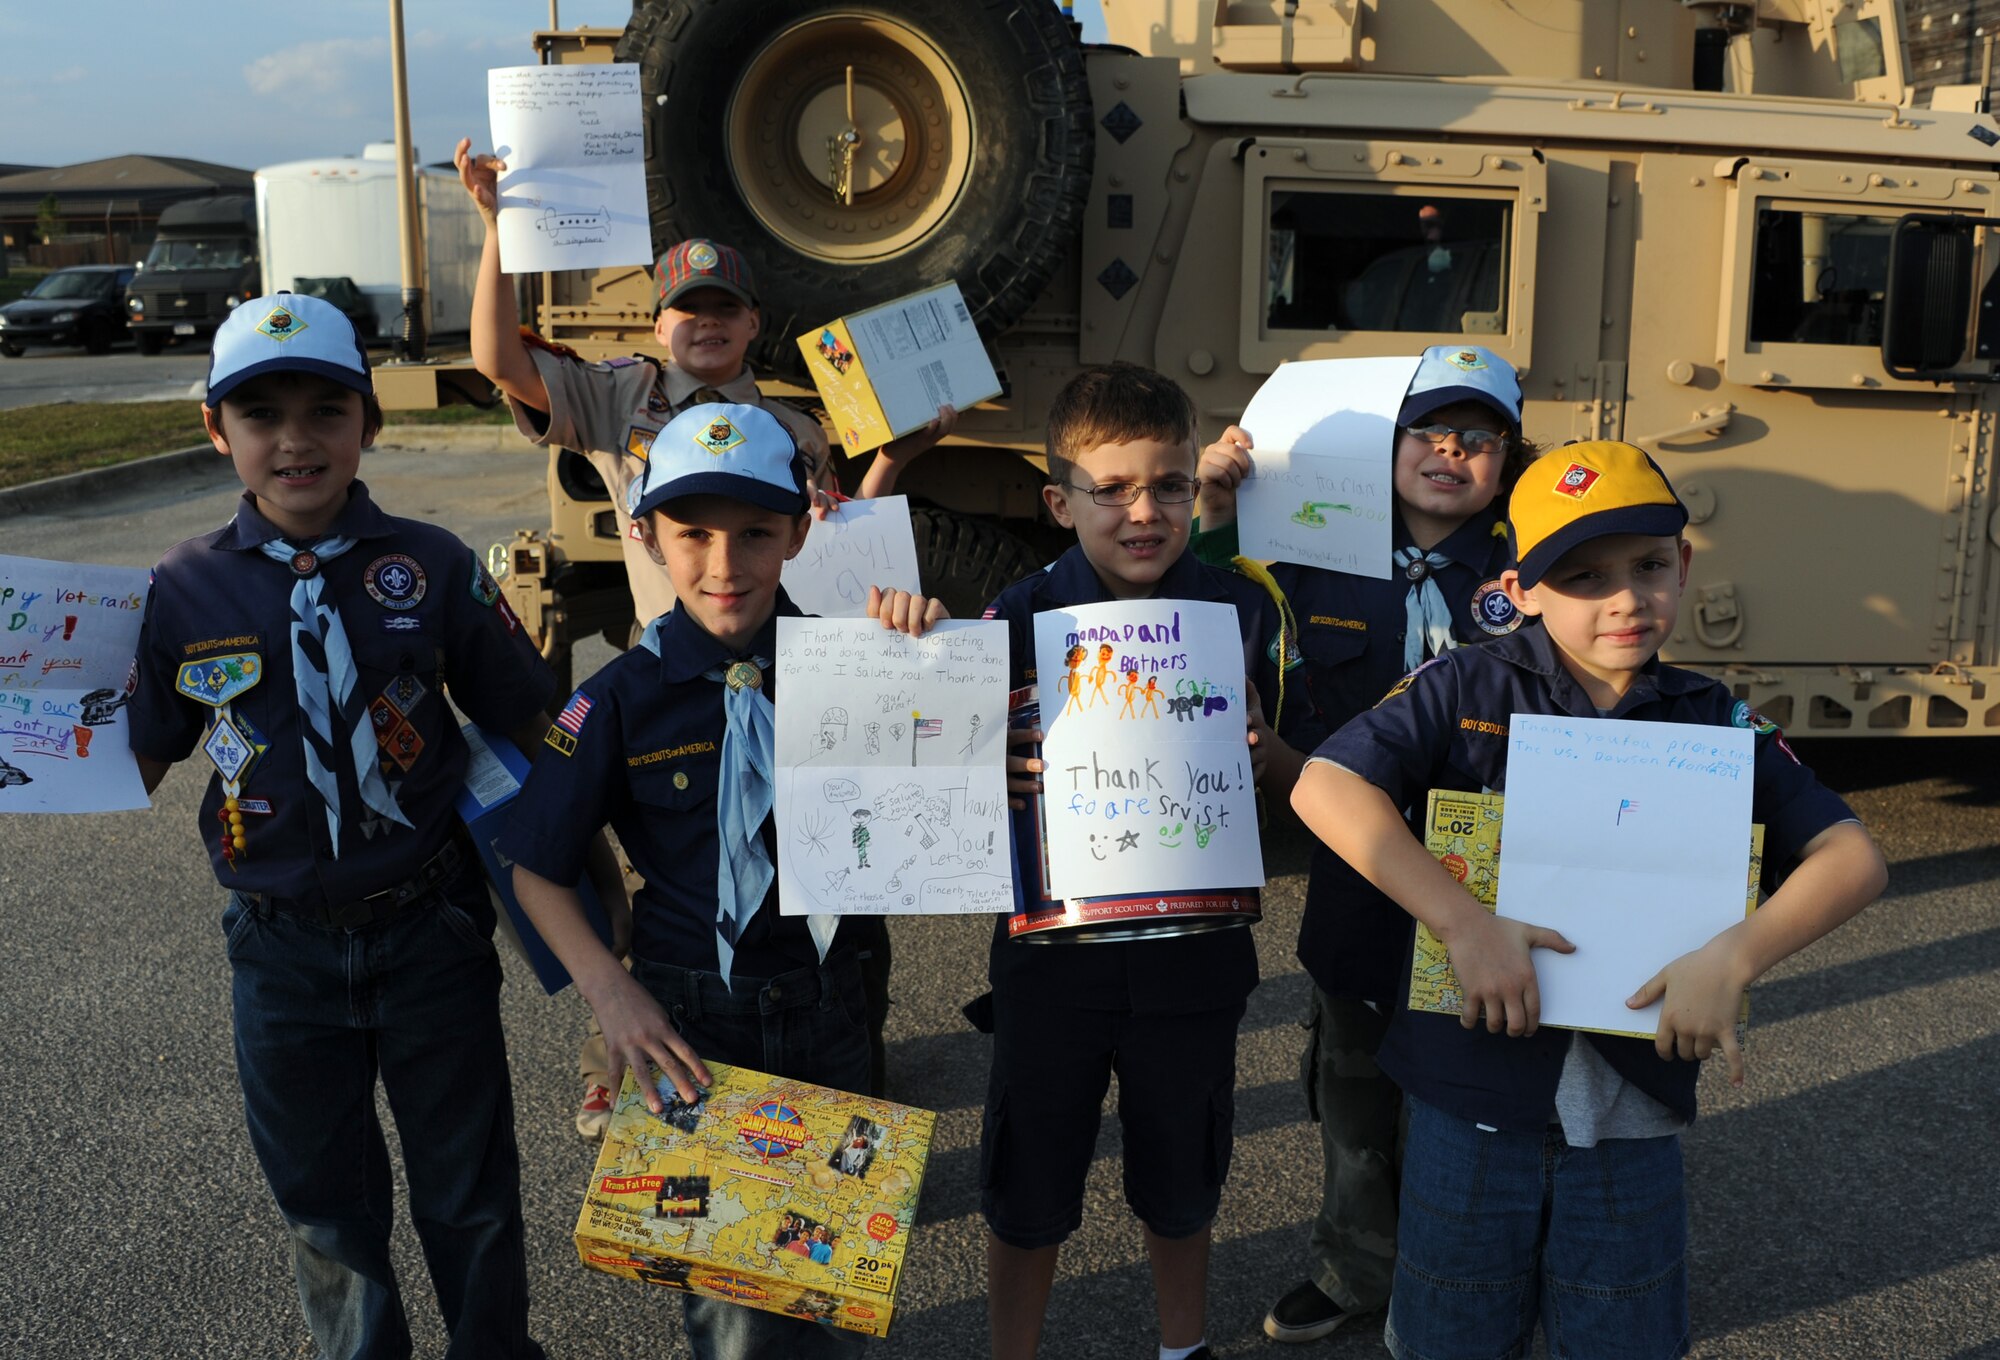 Boy Scouts from Cub Scout Pack 104 of Navarre, Fla., hold up homemade cards for military personnel during their visit to the 23rd Special Tactics Squadron at Hurlburt Field, Fla., Jan. 24, 2013. Six Boy Scouts of America donated $760 worth of popcorn to Airmen on behalf of Pack 104. The Scouts were given the opportunity to explore a Humvee and witness combat controls rappel as a token of appreciation. (U.S. Air Force photo/Rachel Arroyo)